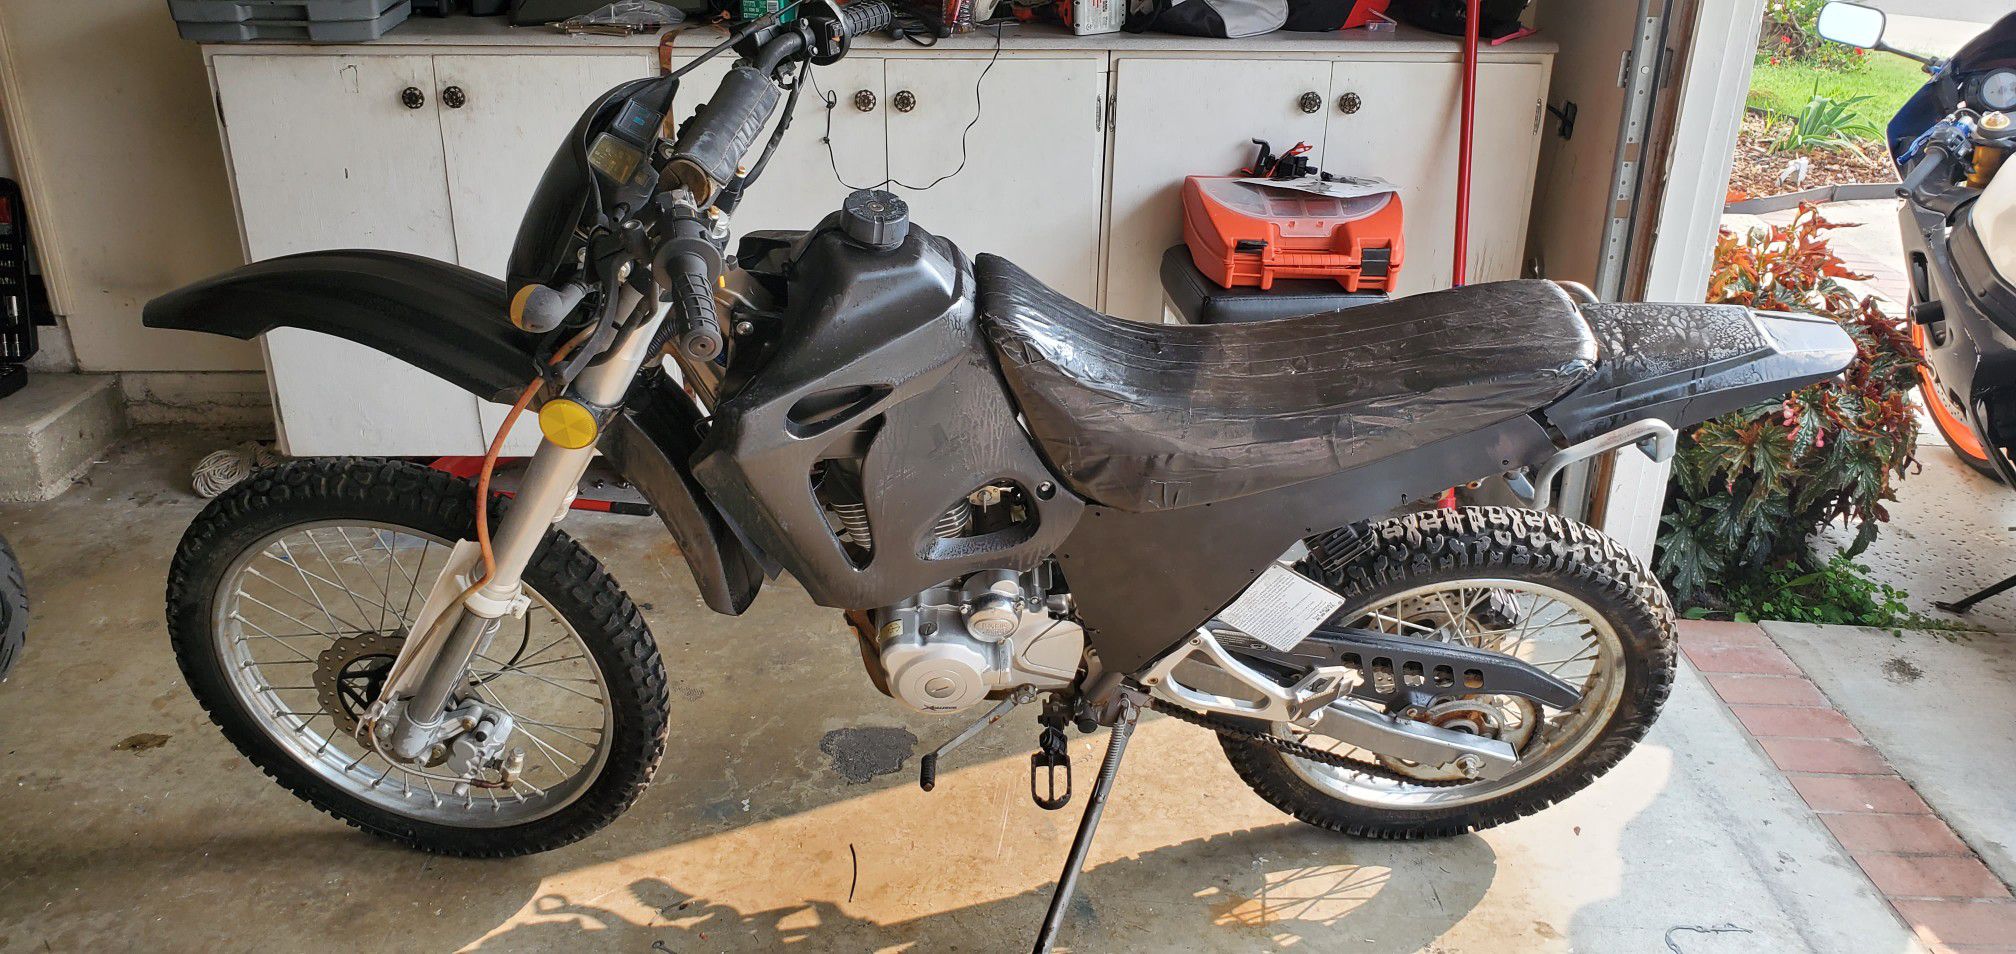 2006 Dual sport full size Enduro clean title starts up only 20 miles on bike